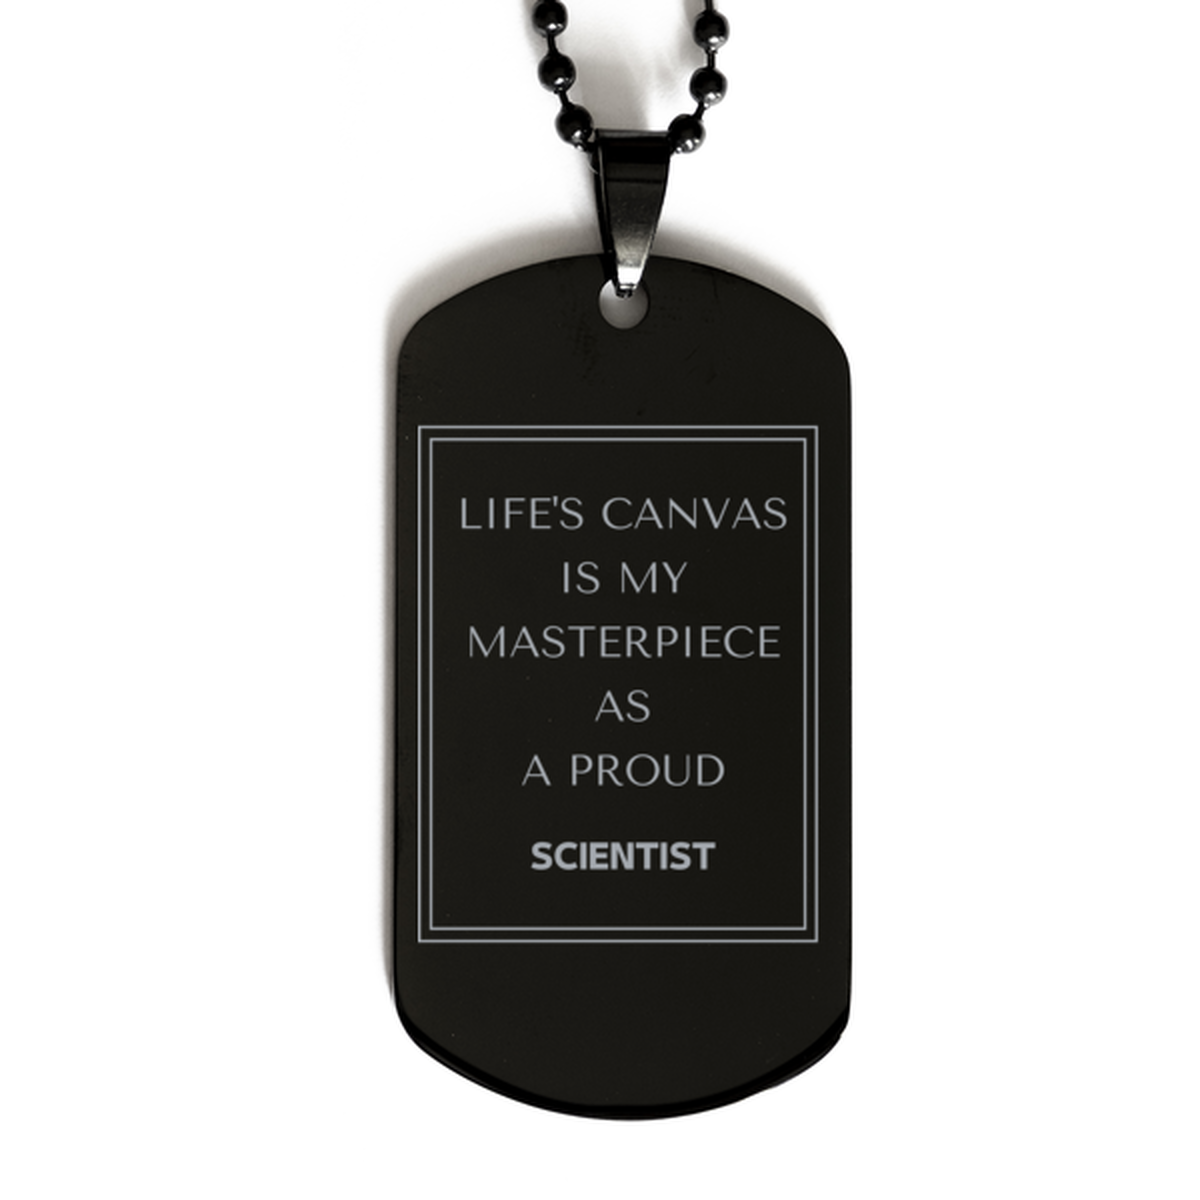 Proud Scientist Gifts, Life's canvas is my masterpiece, Epic Birthday Christmas Unique Black Dog Tag For Scientist, Coworkers, Men, Women, Friends